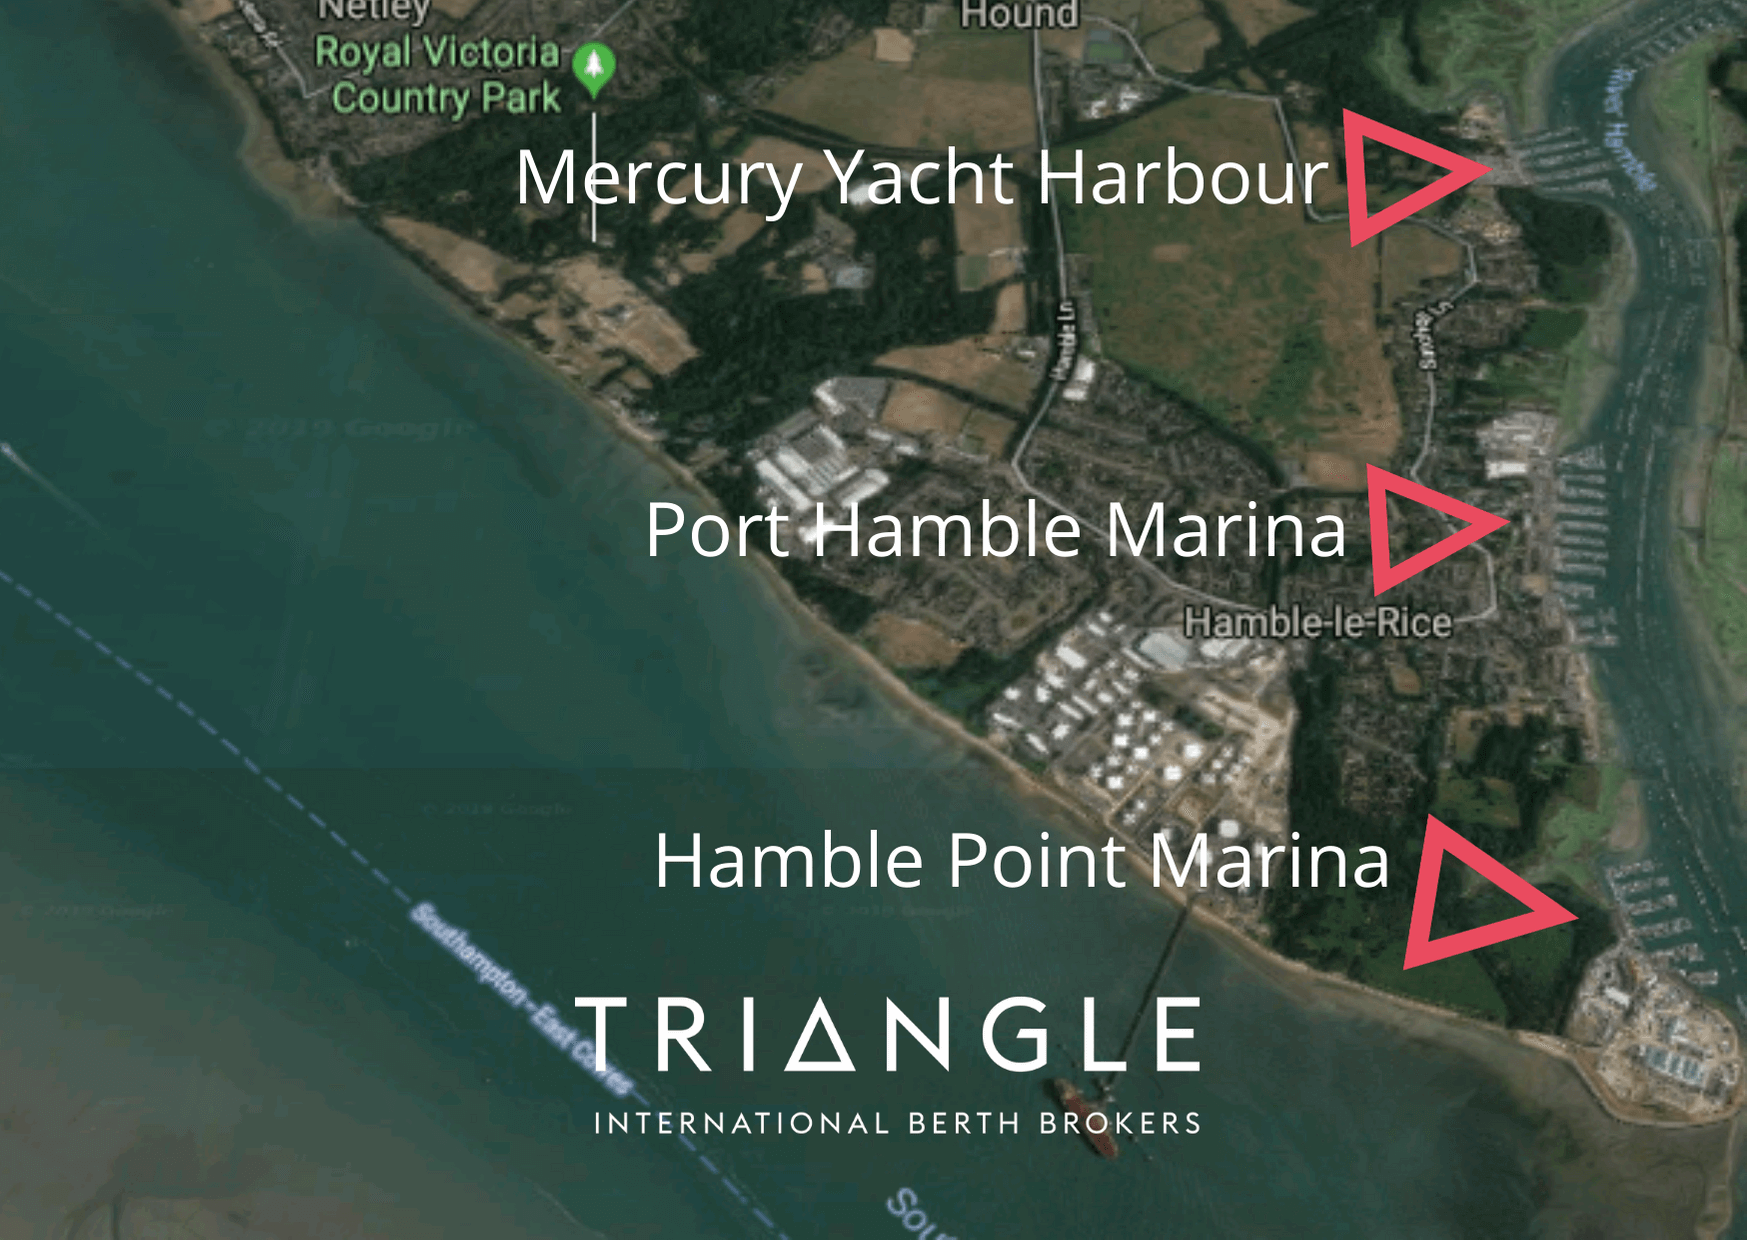 A overview showing the location of Mercury Yacht Harbour, Port Hamble and Hamble Point Marina